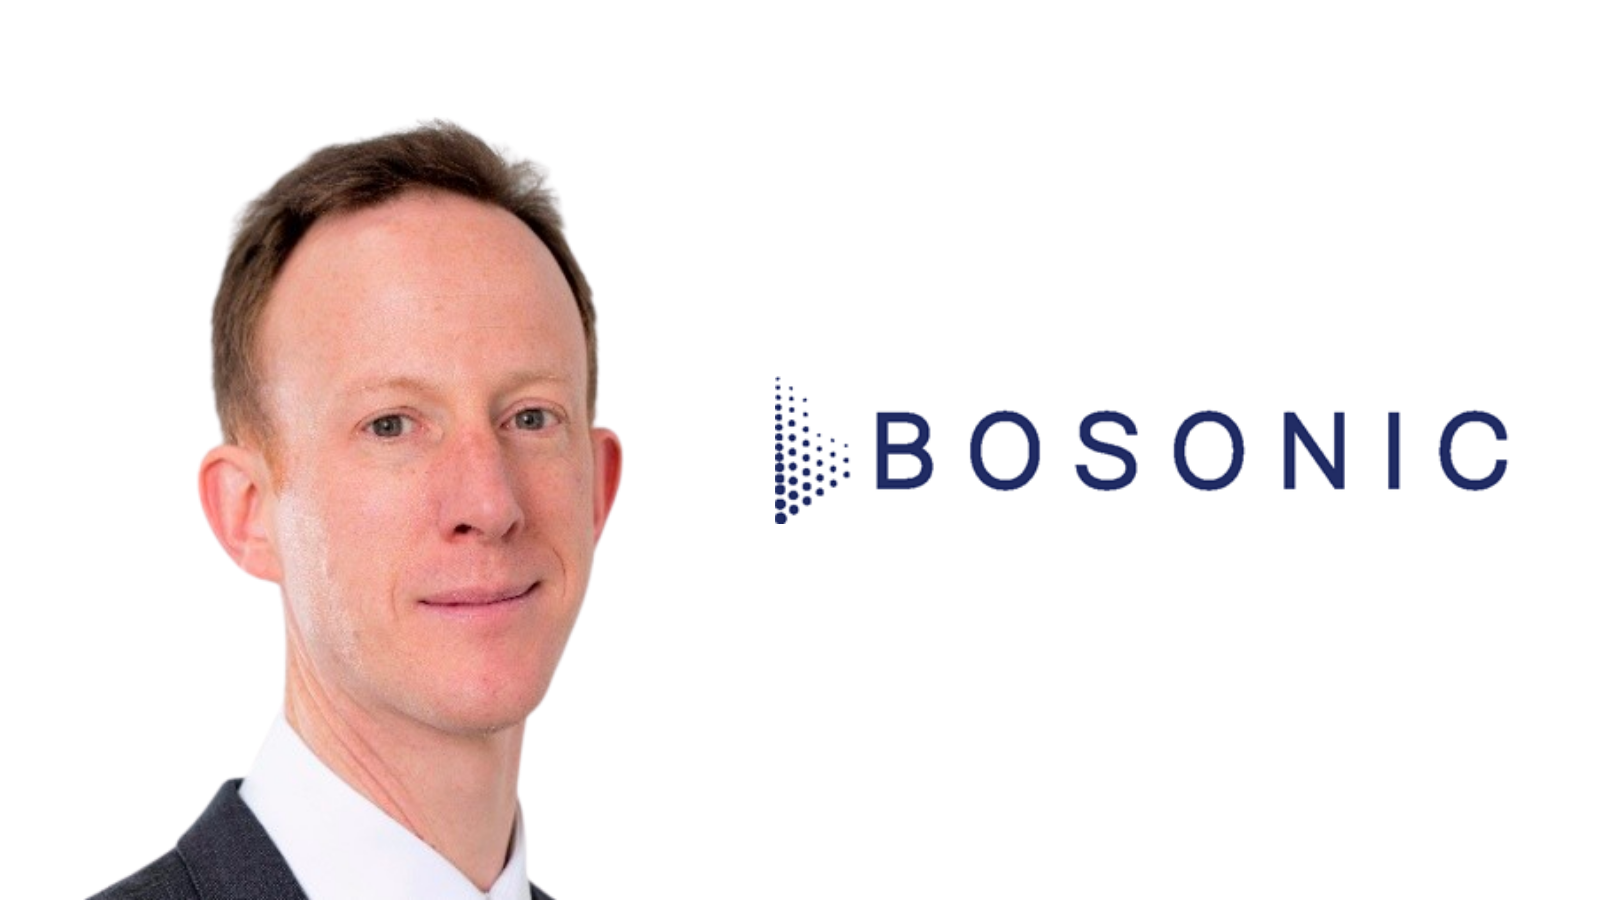  Bosonic Hires Former Head of LCH ForexClear, Paddy Boyle, as Global Head of Clearing and Derivatives